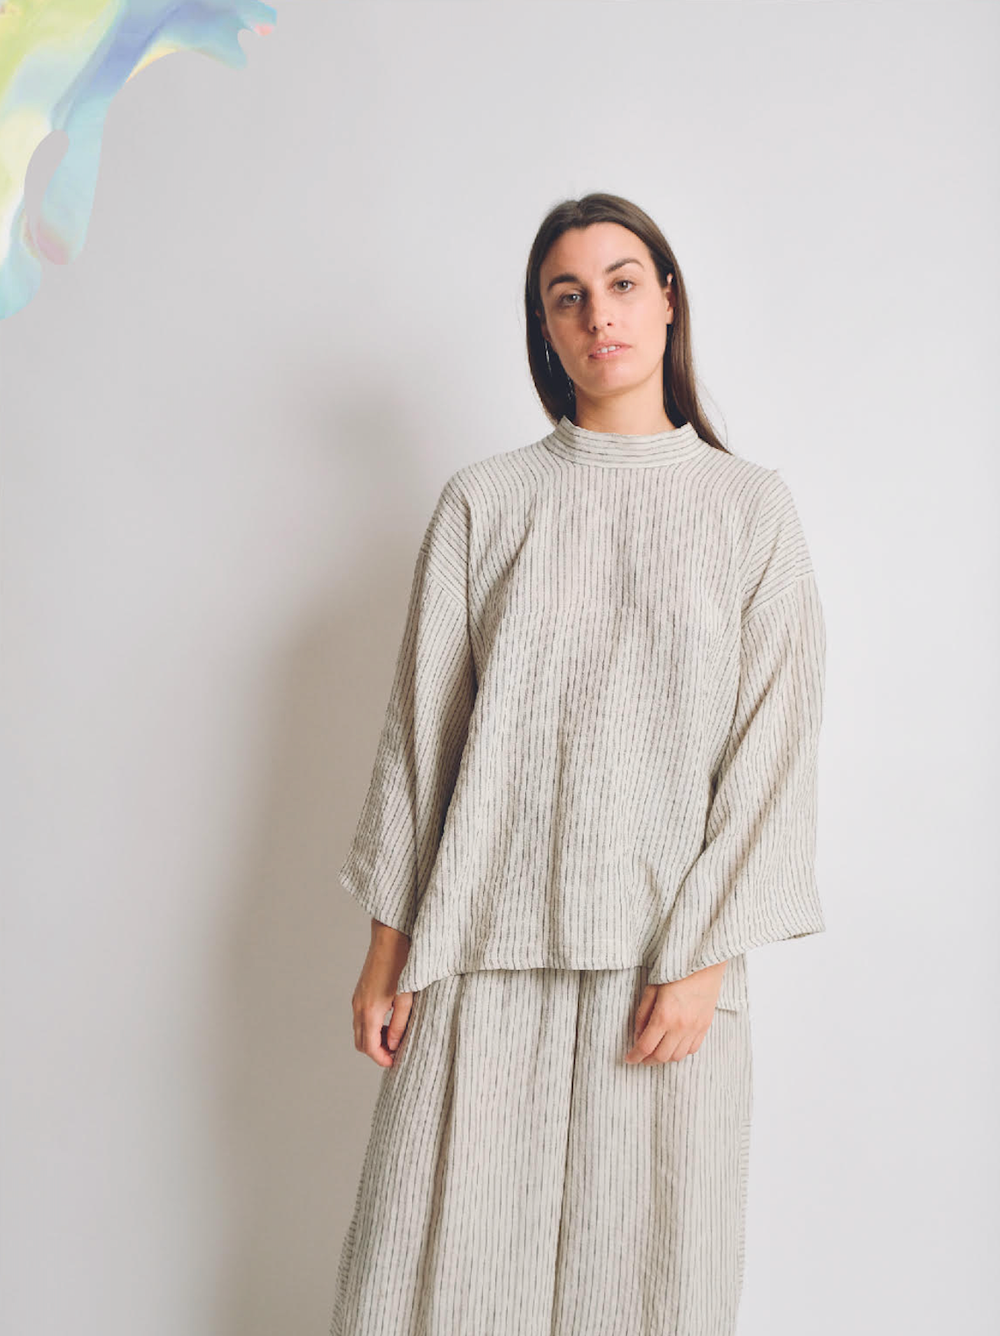 Woman wearing the ZW Tie Top sewing pattern from Birgitta Helmersson on The Fold Line. A top pattern made in light to mid weight cotton or linen, mid weight silk or viscose fabrics , featuring an oversized shape, relaxed fit, round high neck with attached